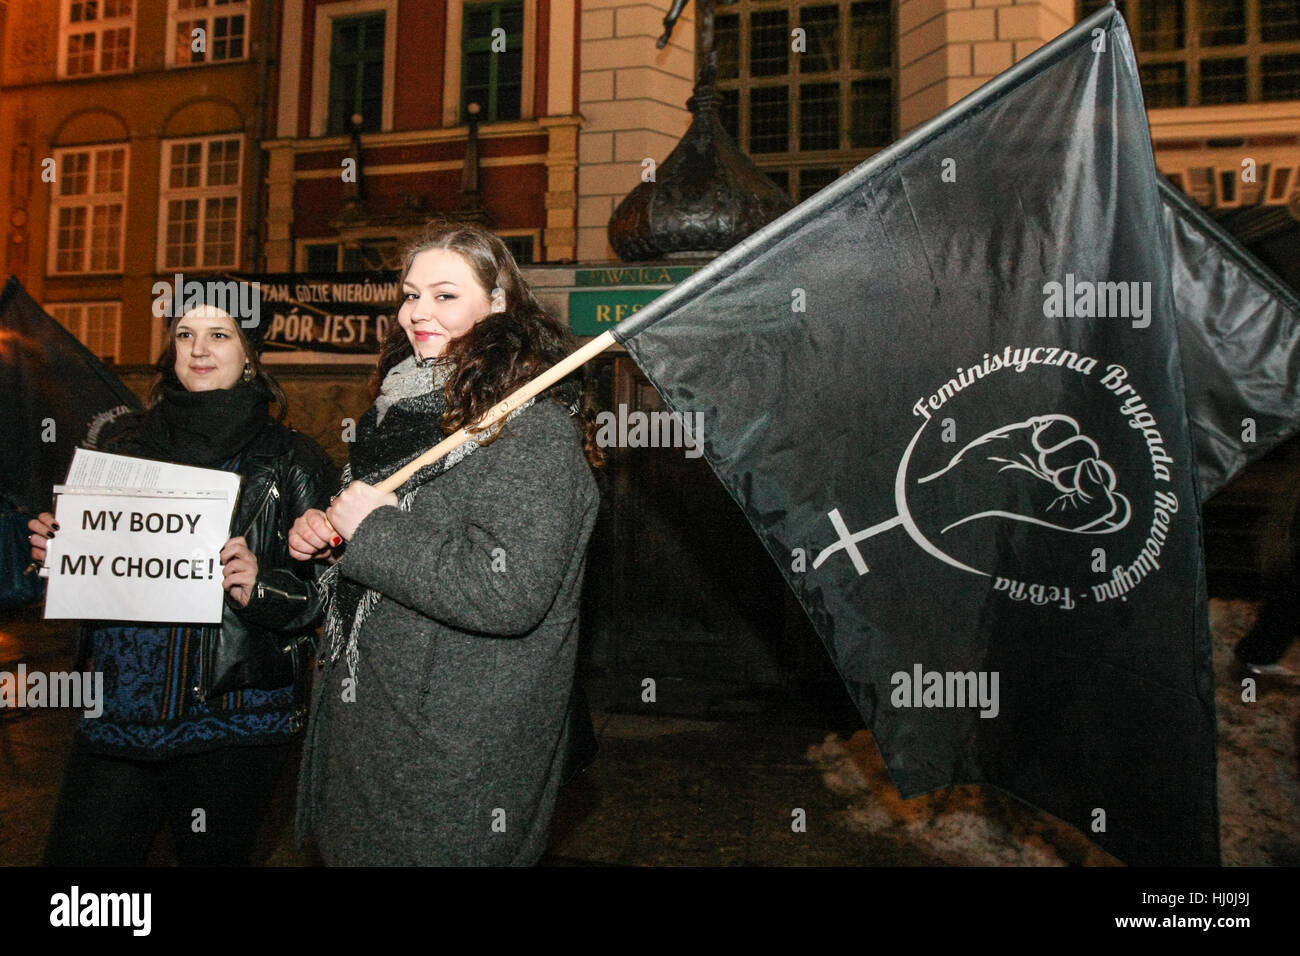 Gdansk, Poland. 21st January, 2017. Demonstrators with equality slogans on posters are seen on January 21st, 2017 in Gdansk, Poland. Polish woman protest to support The Women's March on Washington which will send a bold message to new US Donald Trump administration on their first day in office, and to the world that women's rights are human rights. Credit: Michal Fludra/Alamy Live News Stock Photo